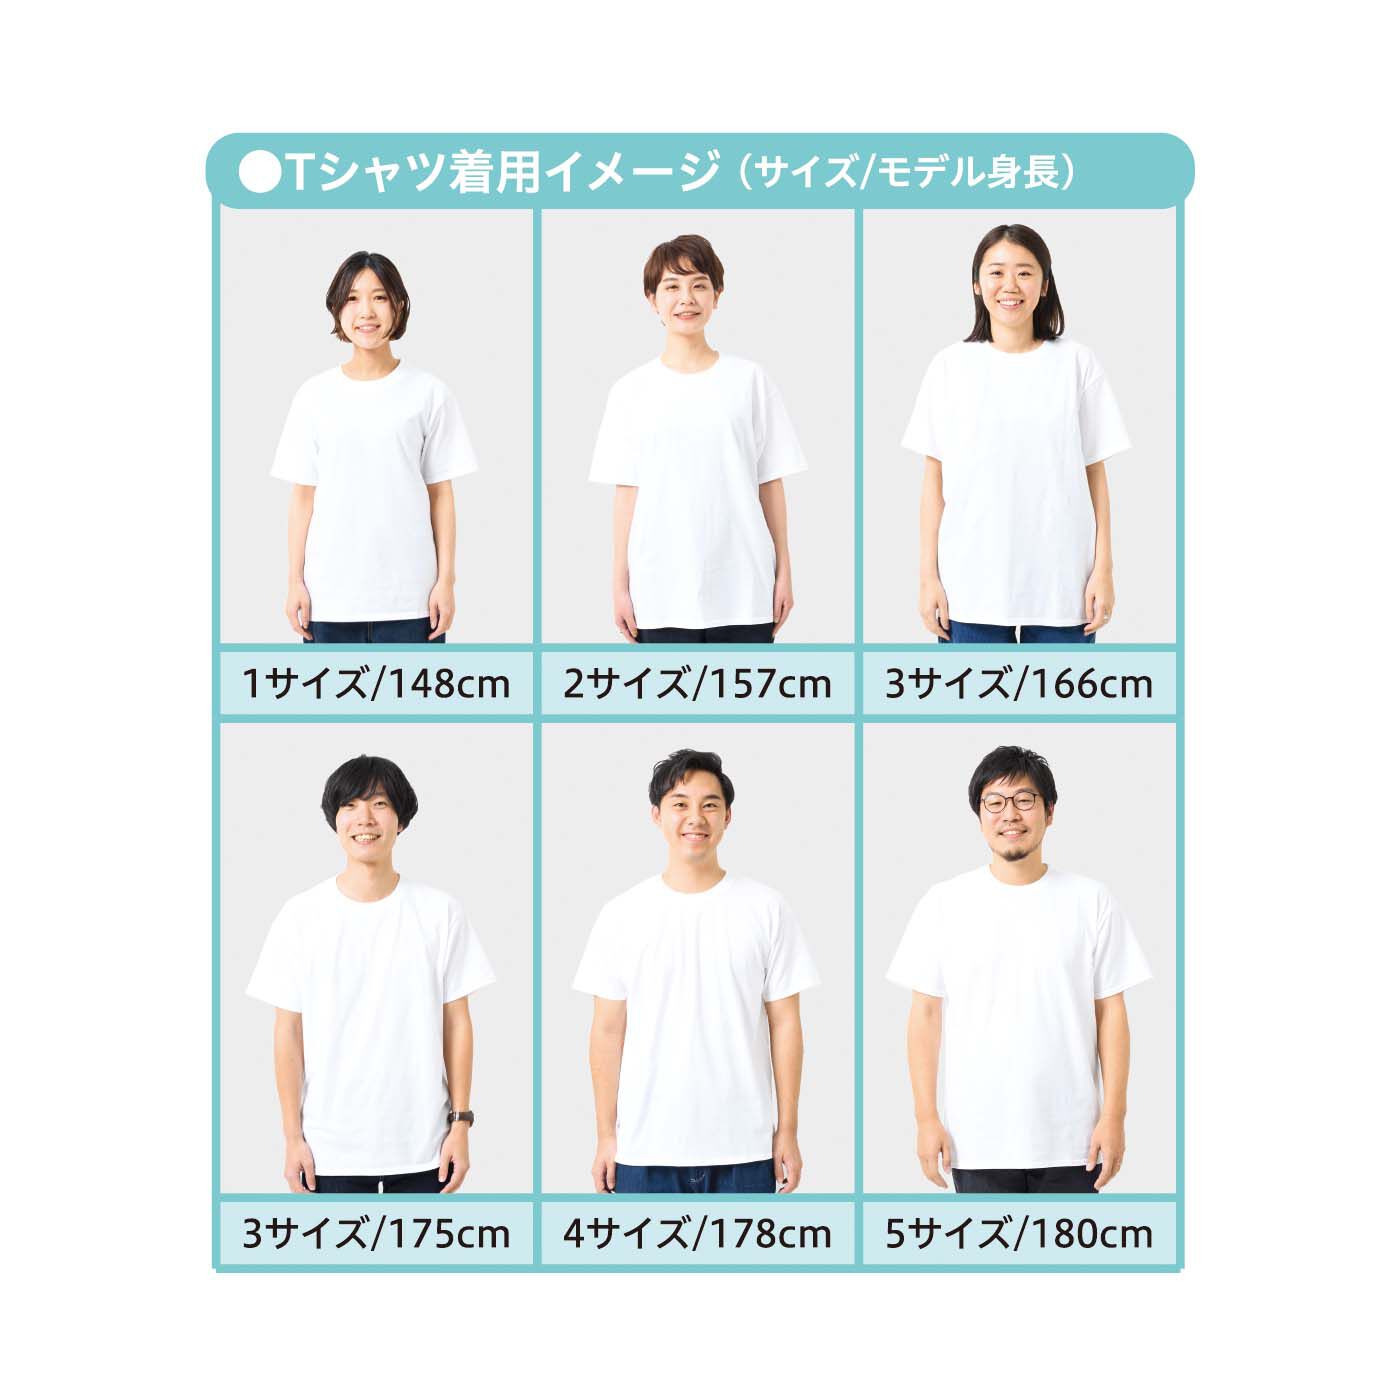 Real Stock|TOPECONHEROES×猫部　地域猫チャリティーTシャツ2022